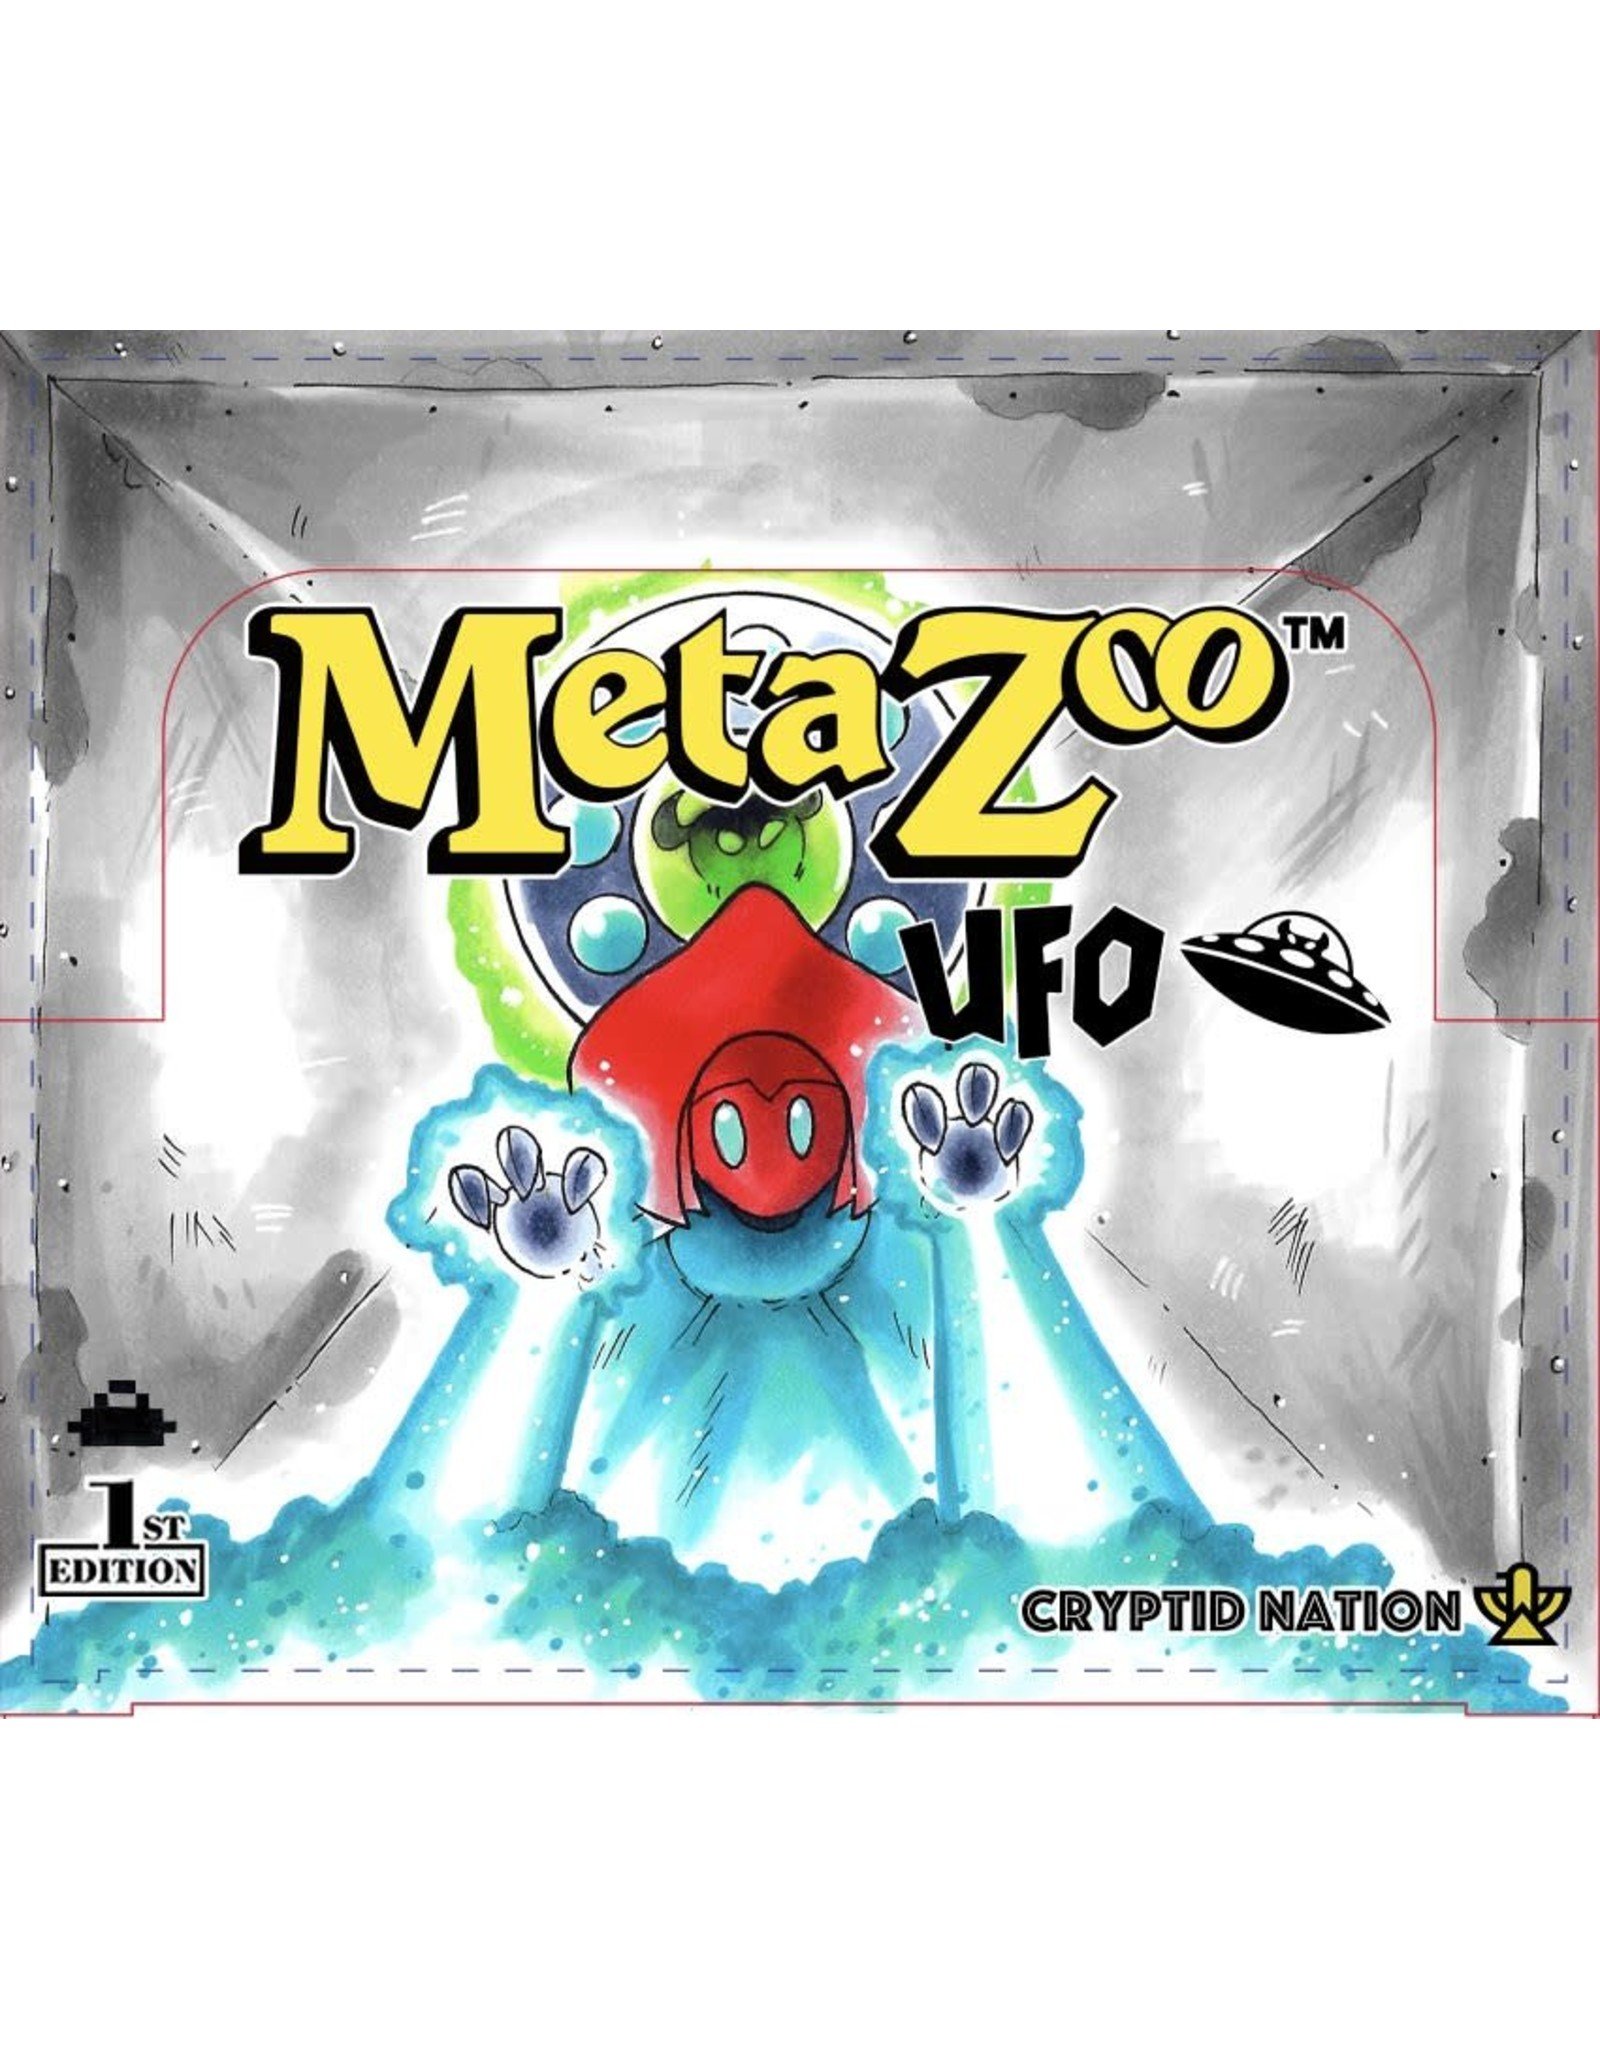 Cryptid Nation MetaZoo TCG: UFO 1st Edition Booster Box